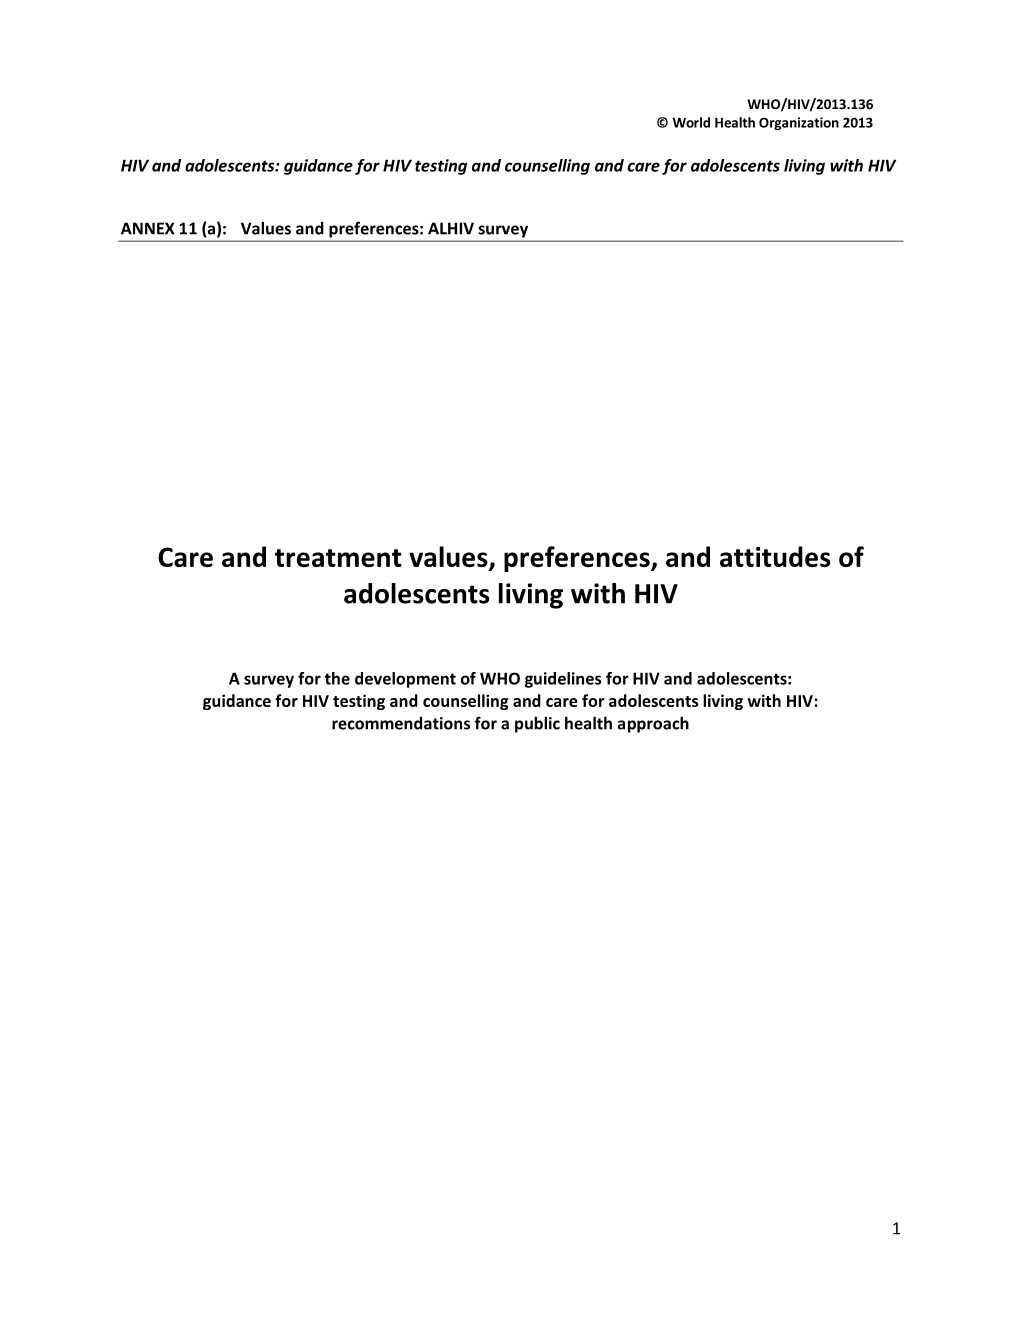 Care and Treatment Values, Preferences, and Attitudes of Adolescents Living with HIV